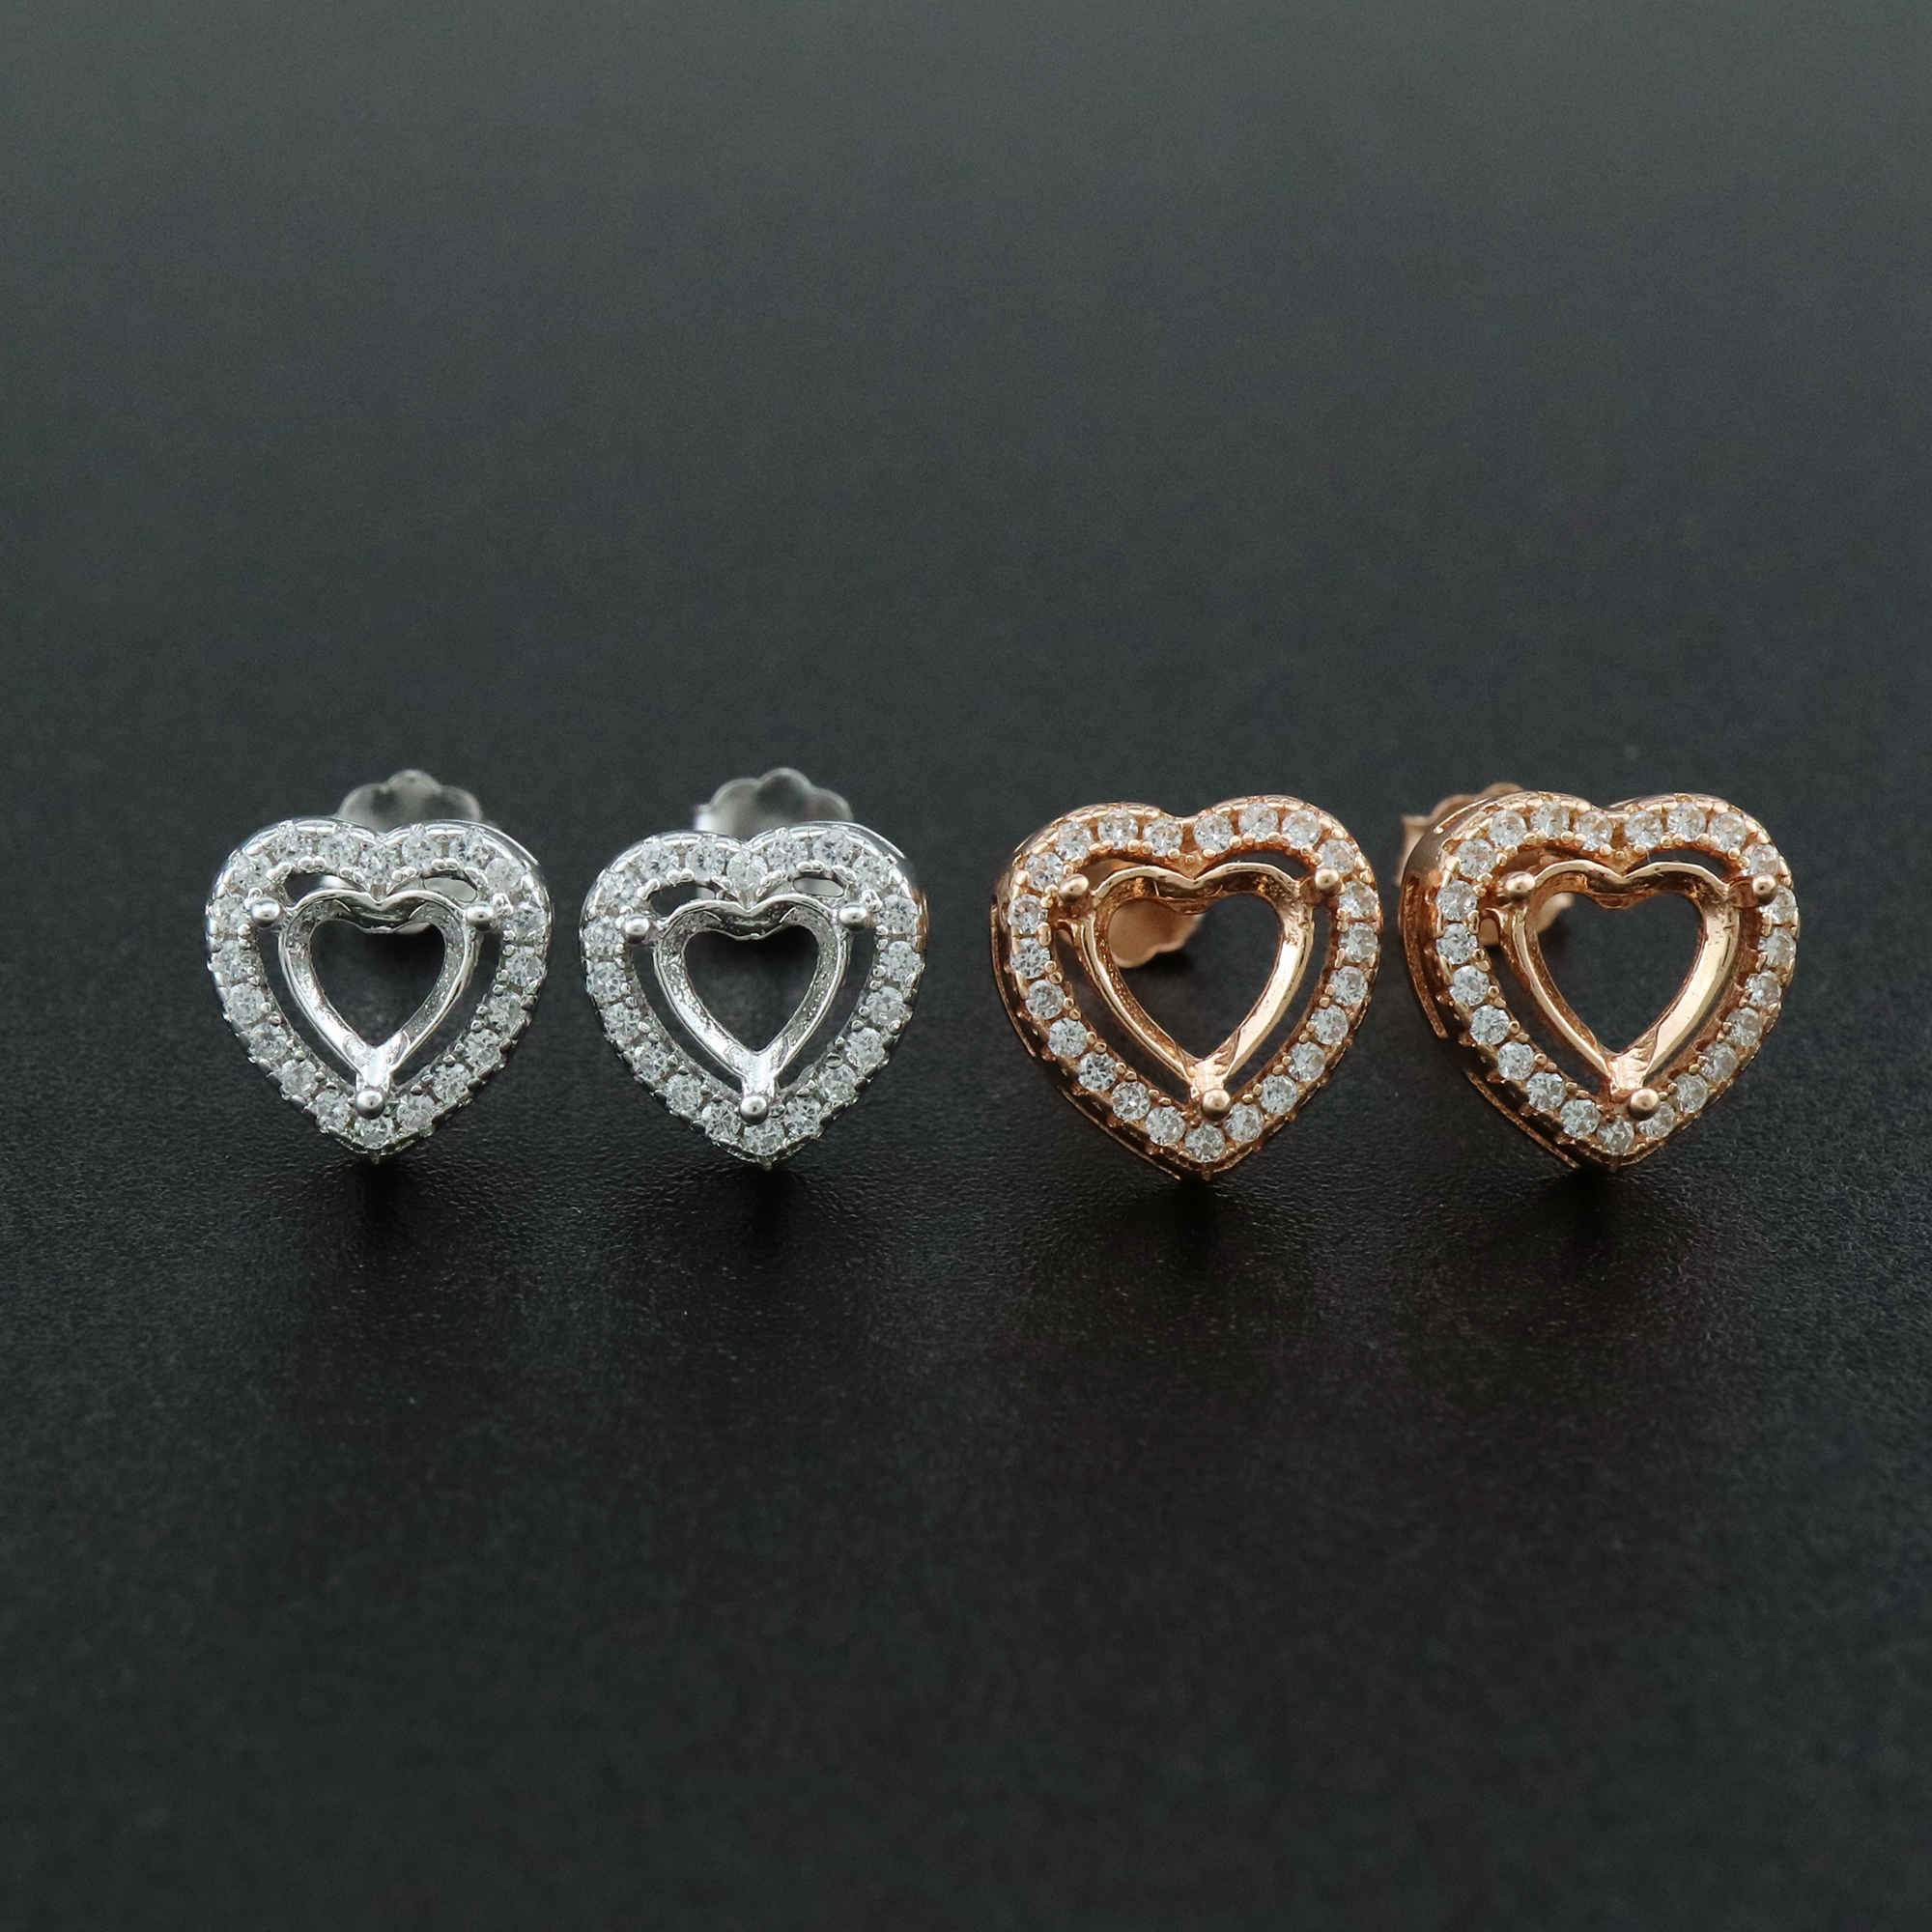 1Pair 5-6MM Rose Gold Plated Solid 925 Sterling Silver Heart Prong Bezel DIY Studs Earrings Settings for Gemstone Jewelry Supplies 1706051 - Click Image to Close